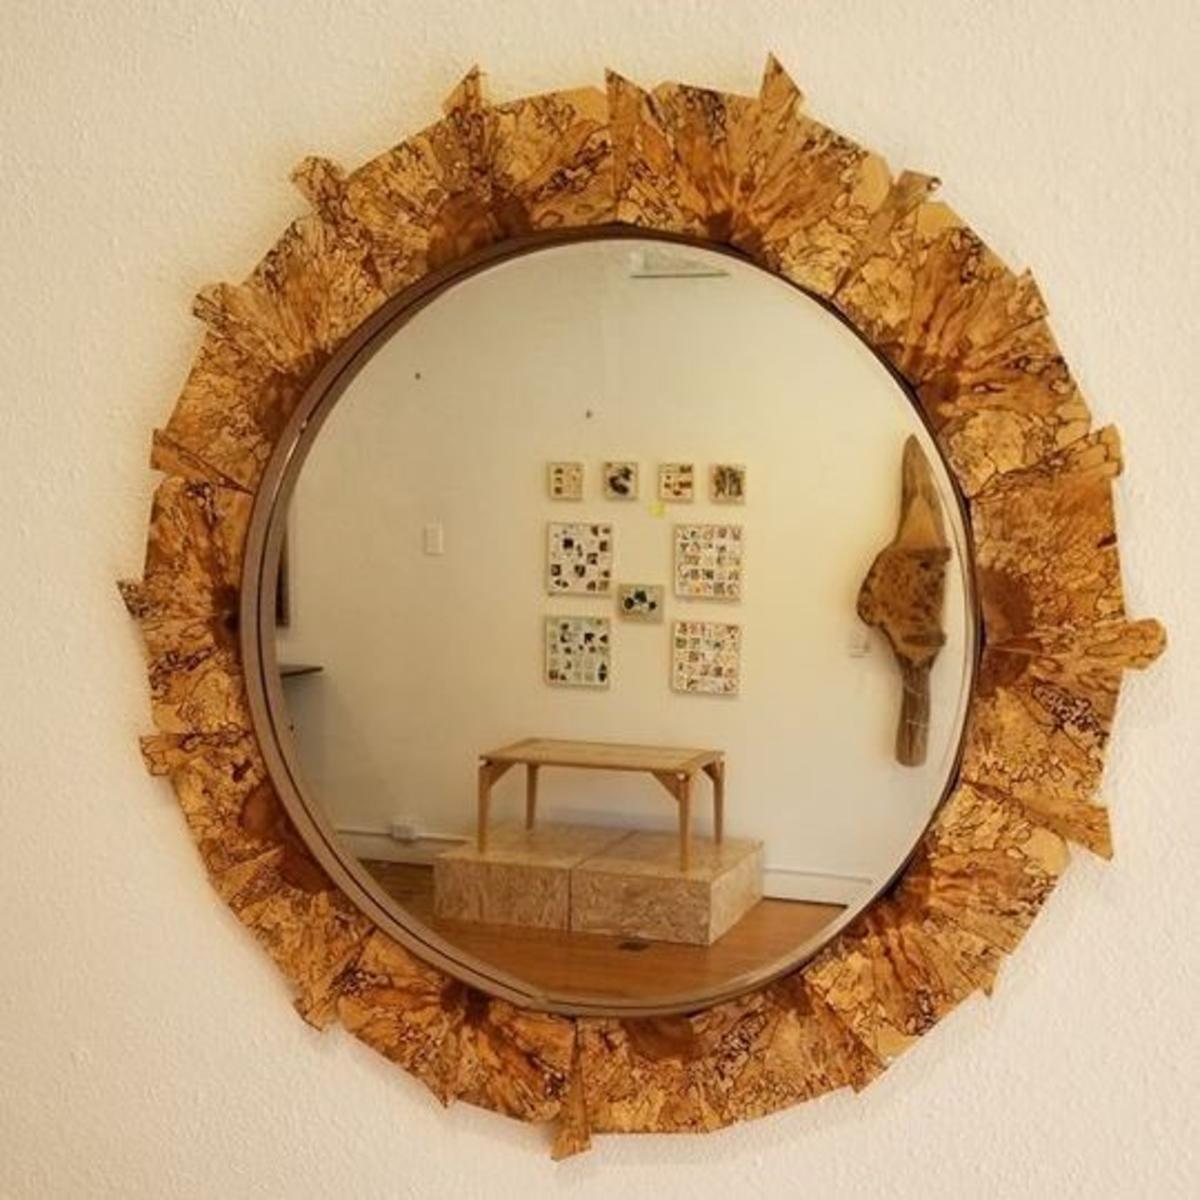 A mirror created by Gallery Q artist, Graham Coulson.